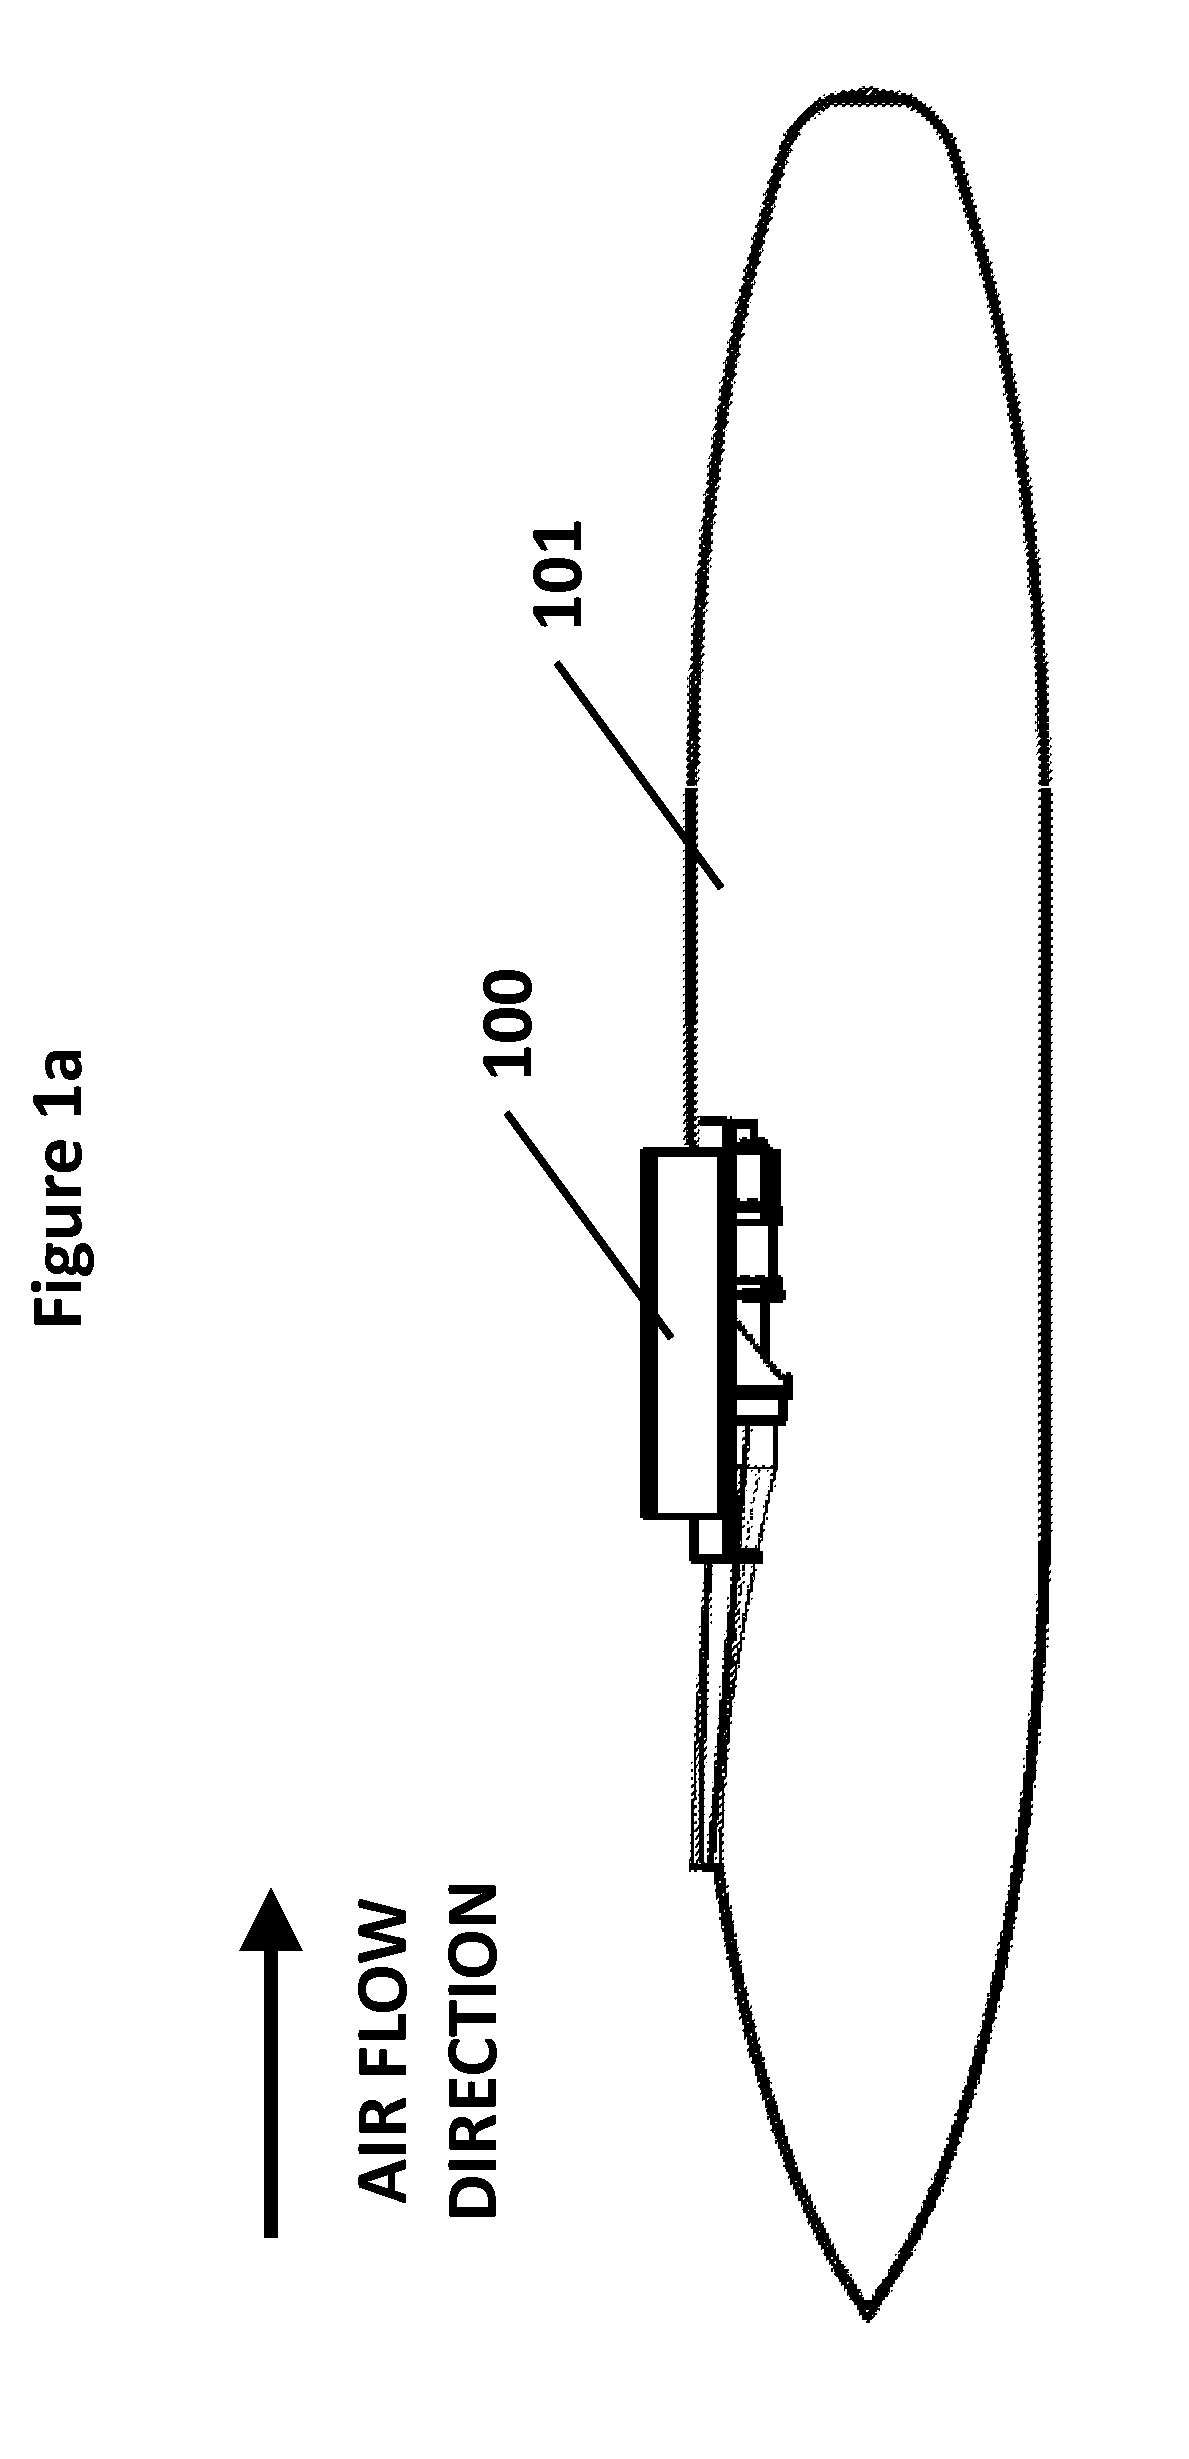 Apparatus and method to increase total-to-static pressure ratio across a turbine